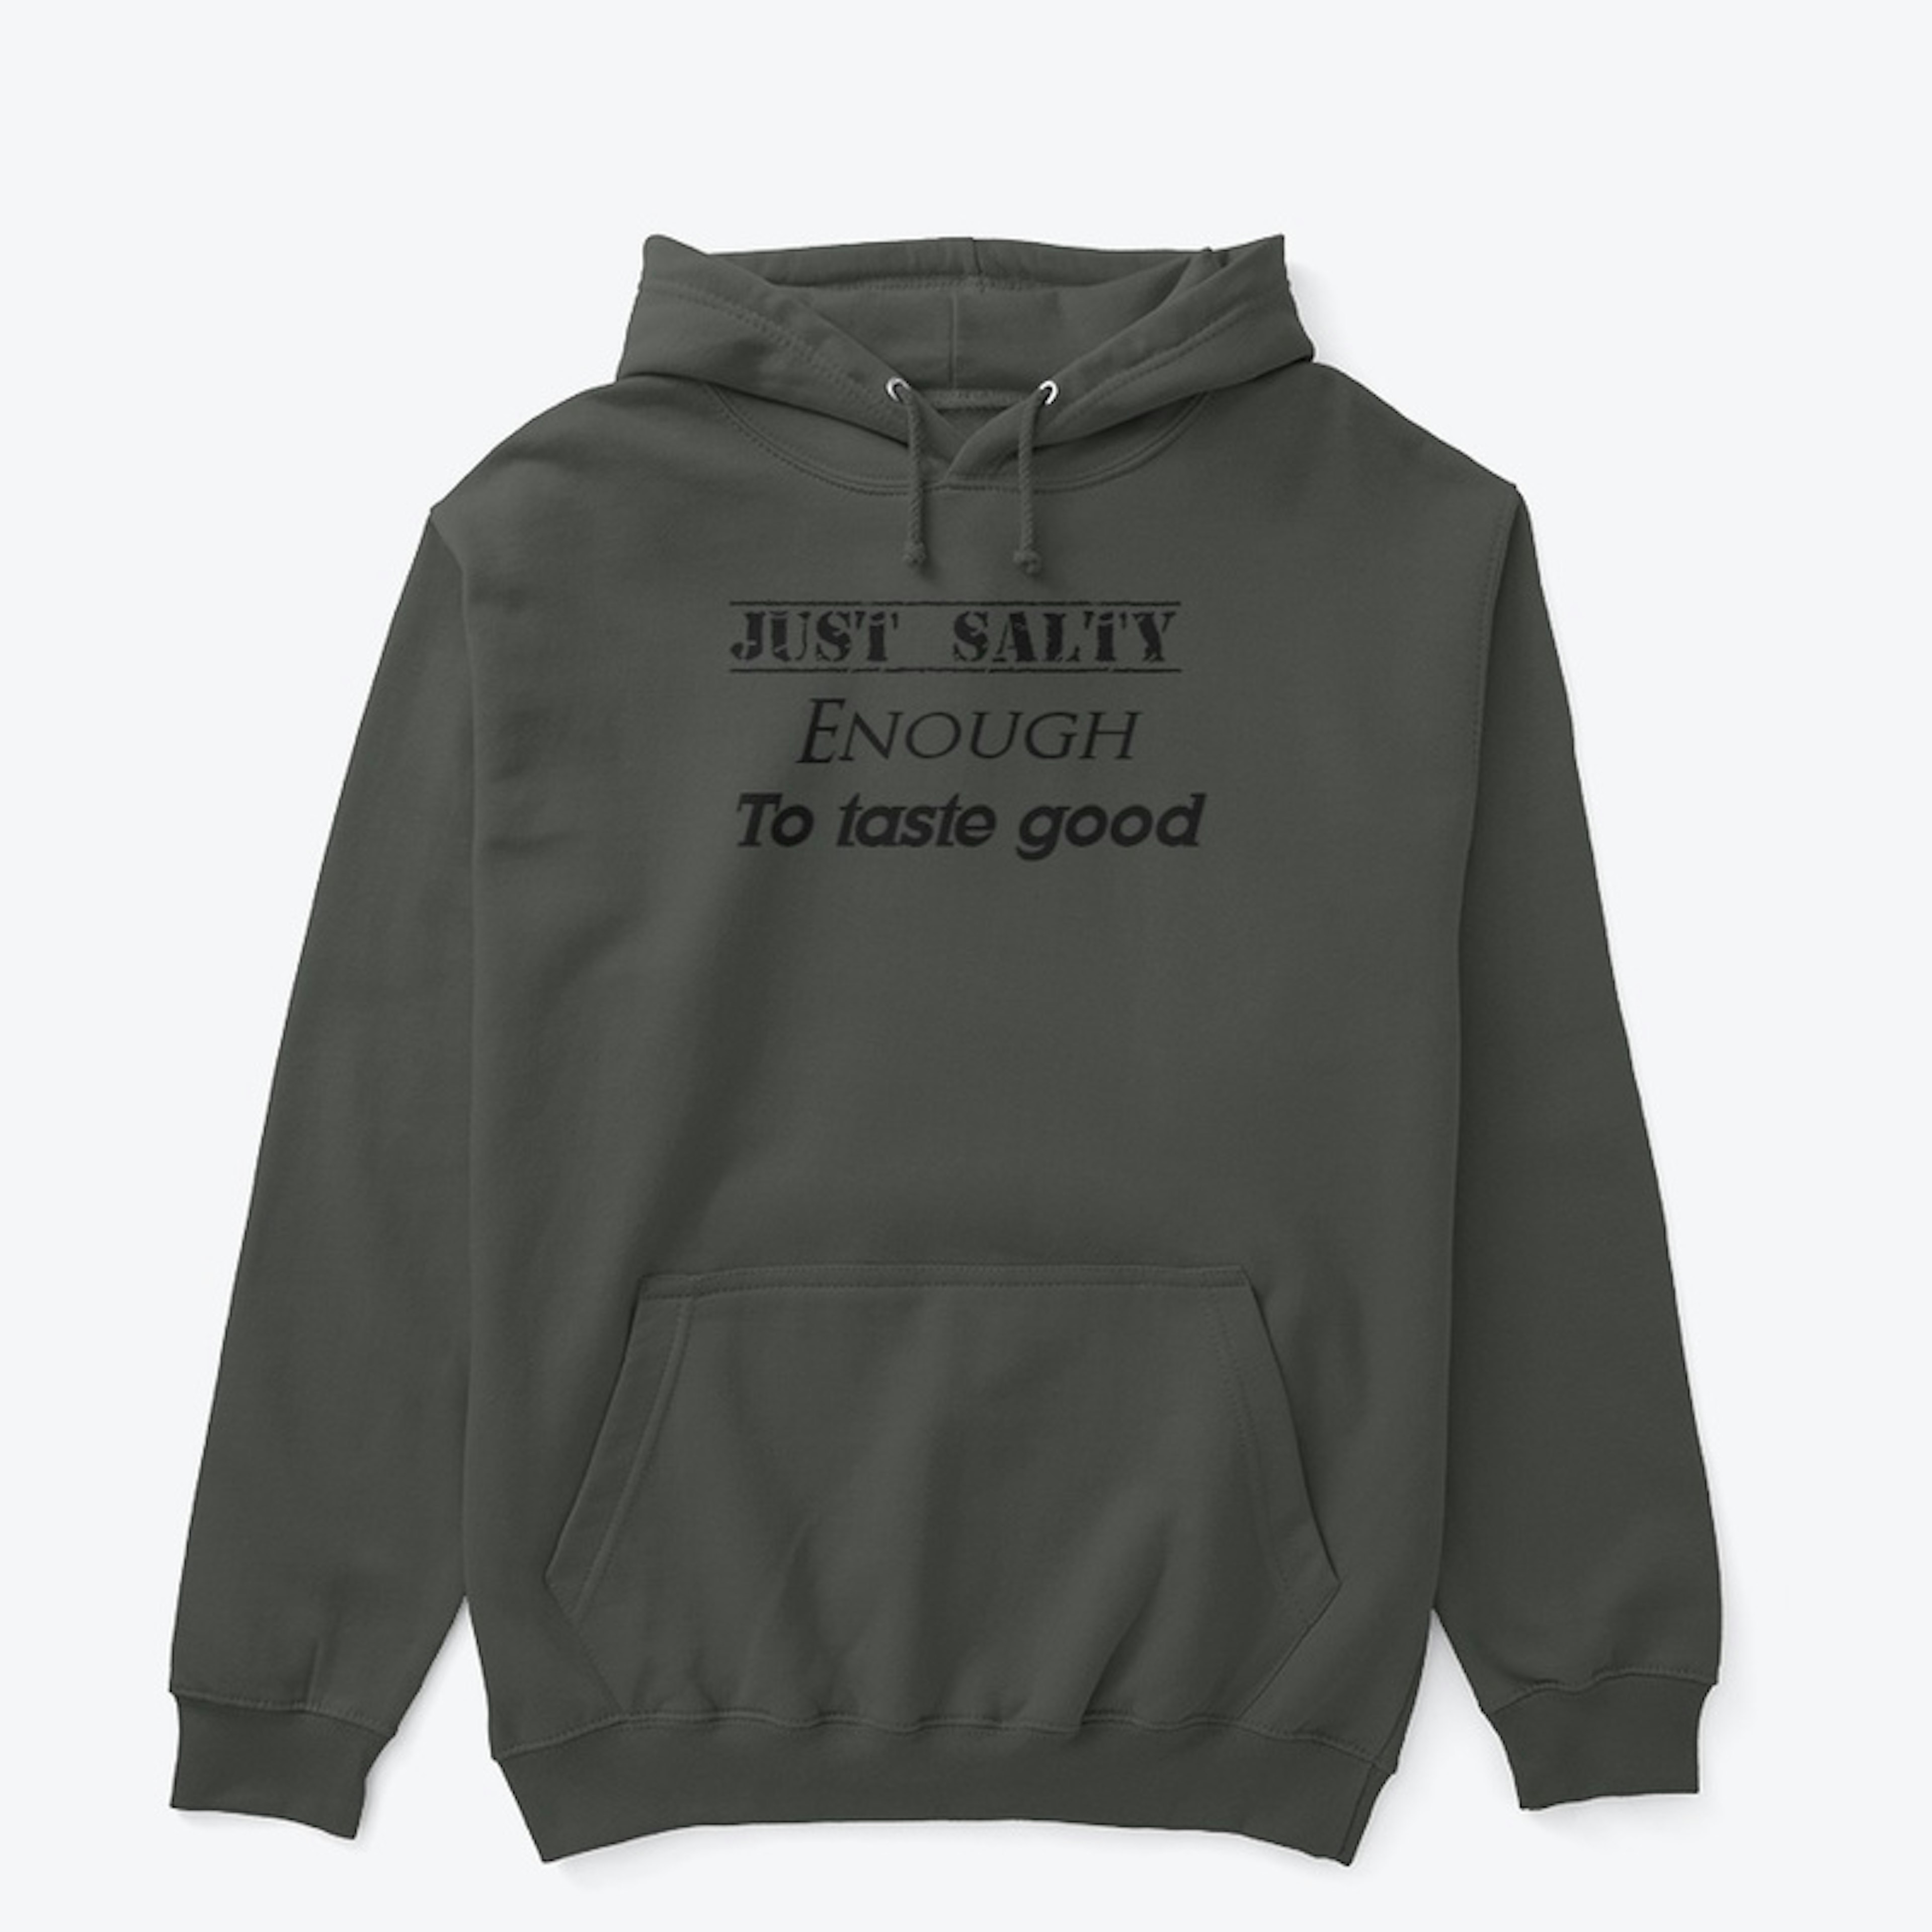 The best dad or husband apparel